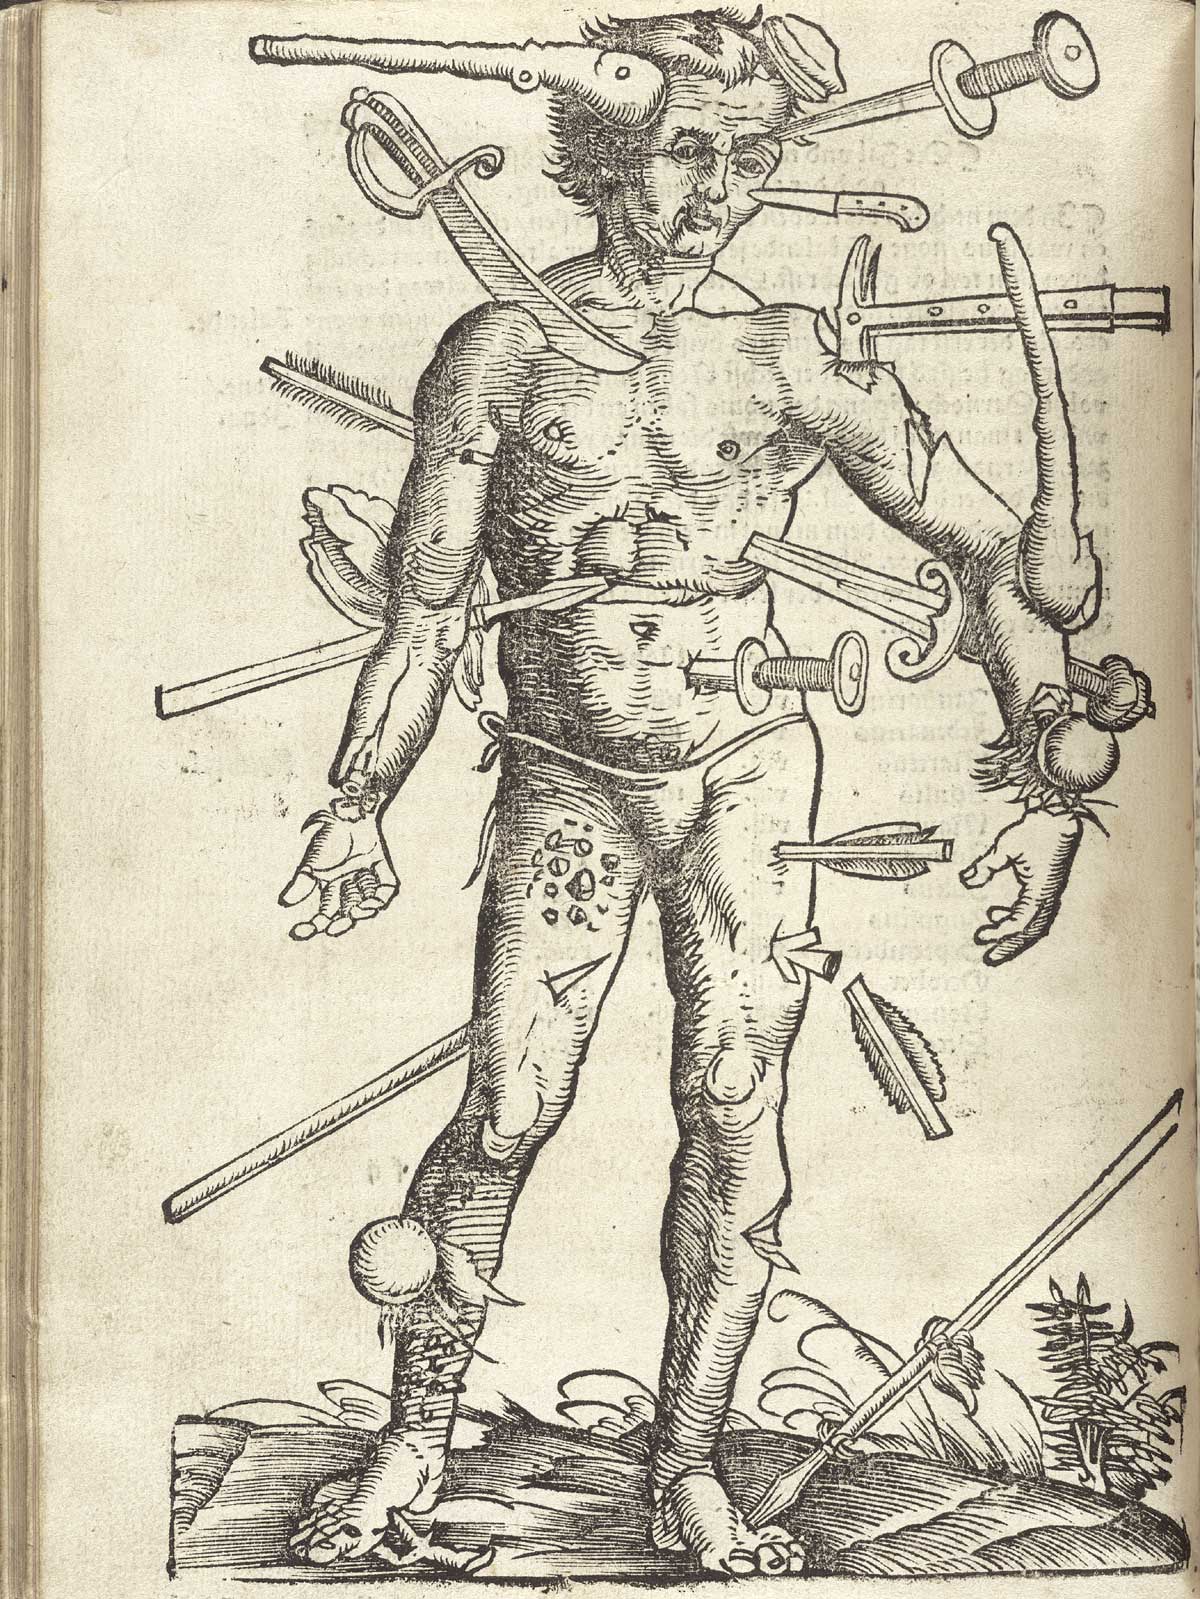 An illustration of a full-length frontal view of a man with wounds from many different kinds of weapons.